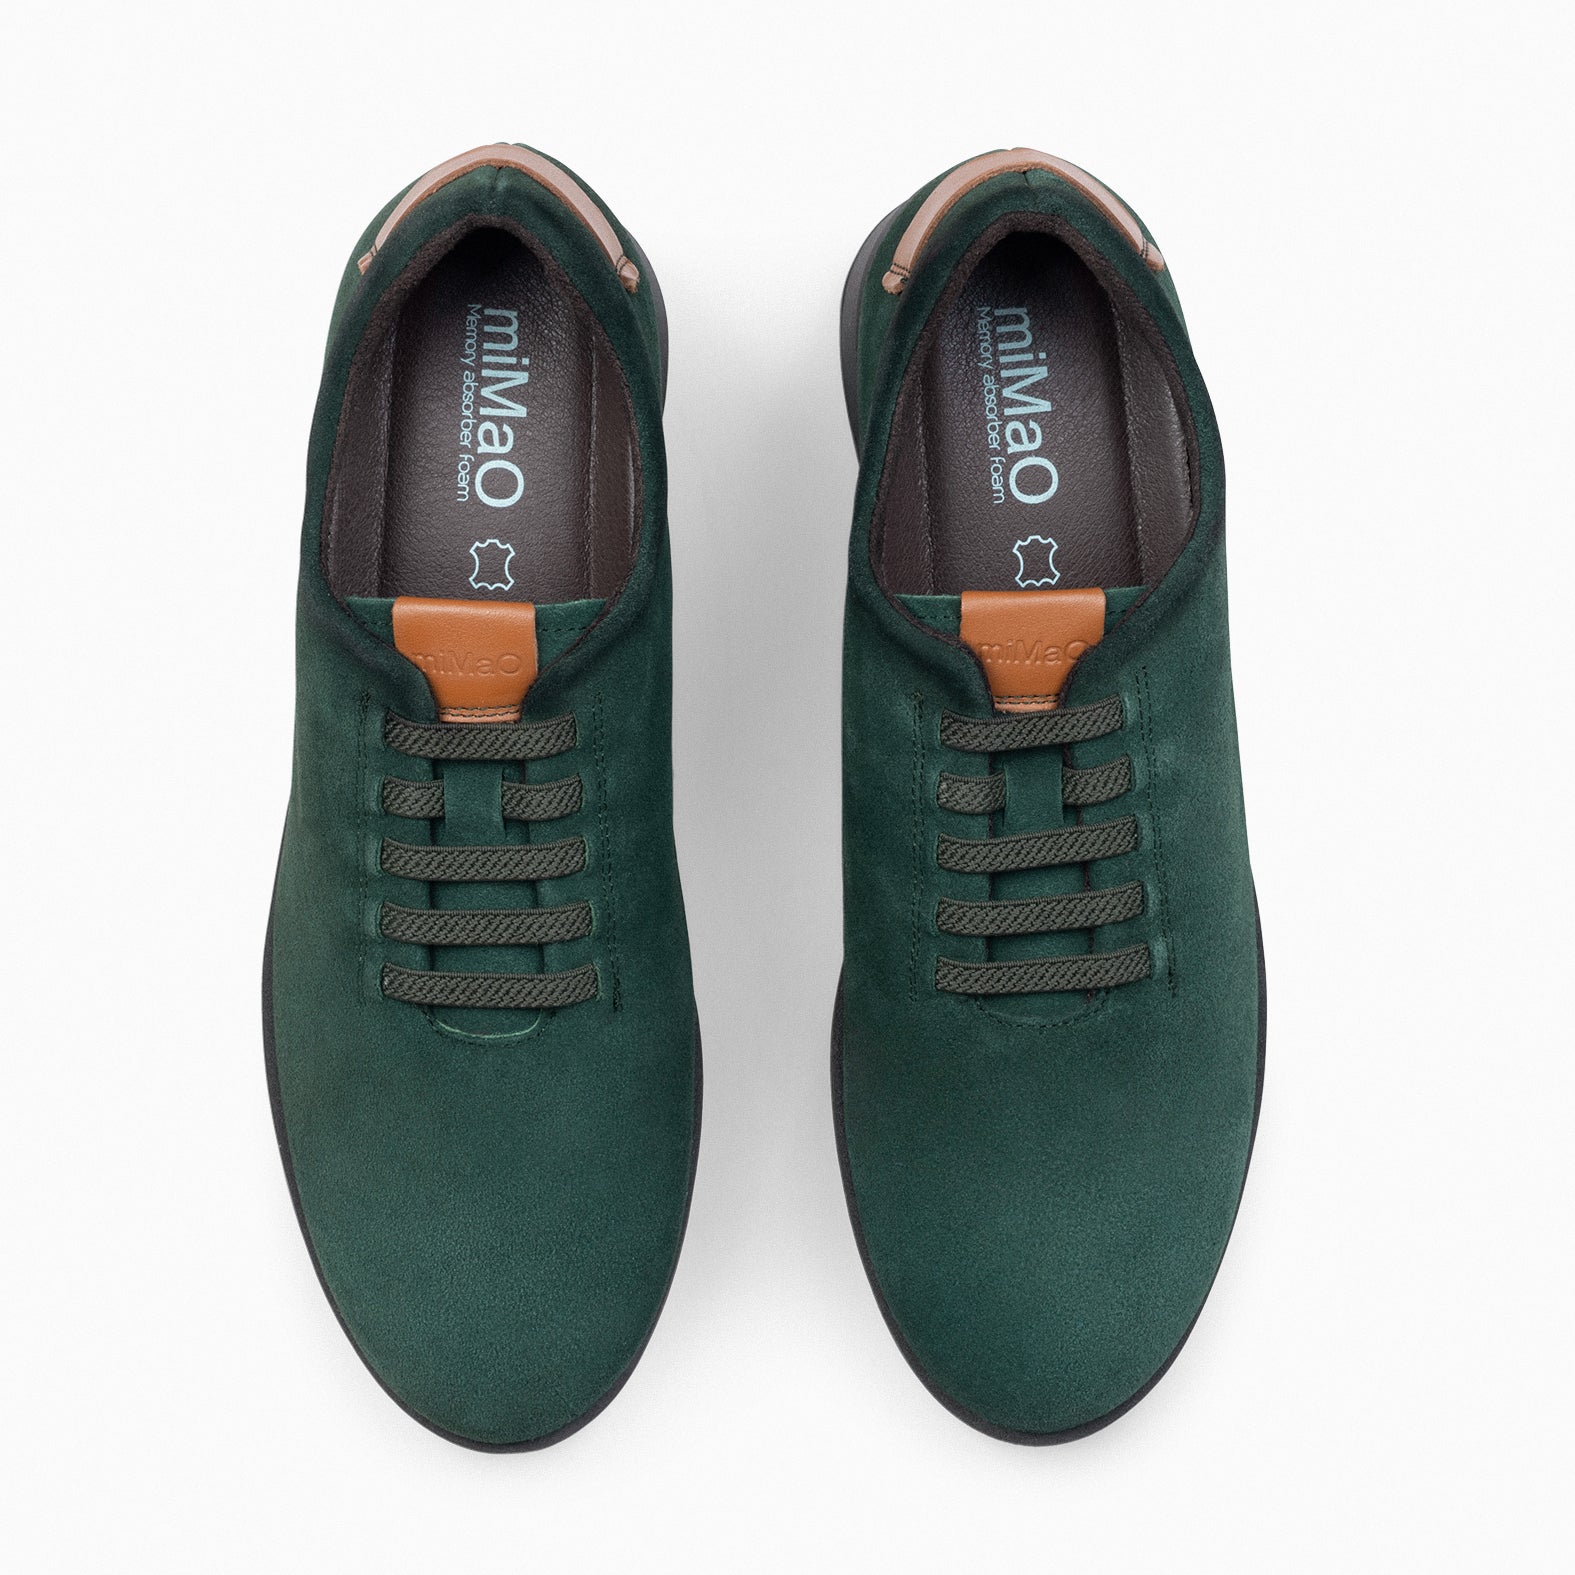 FLY - GREEN sneaker with wedge